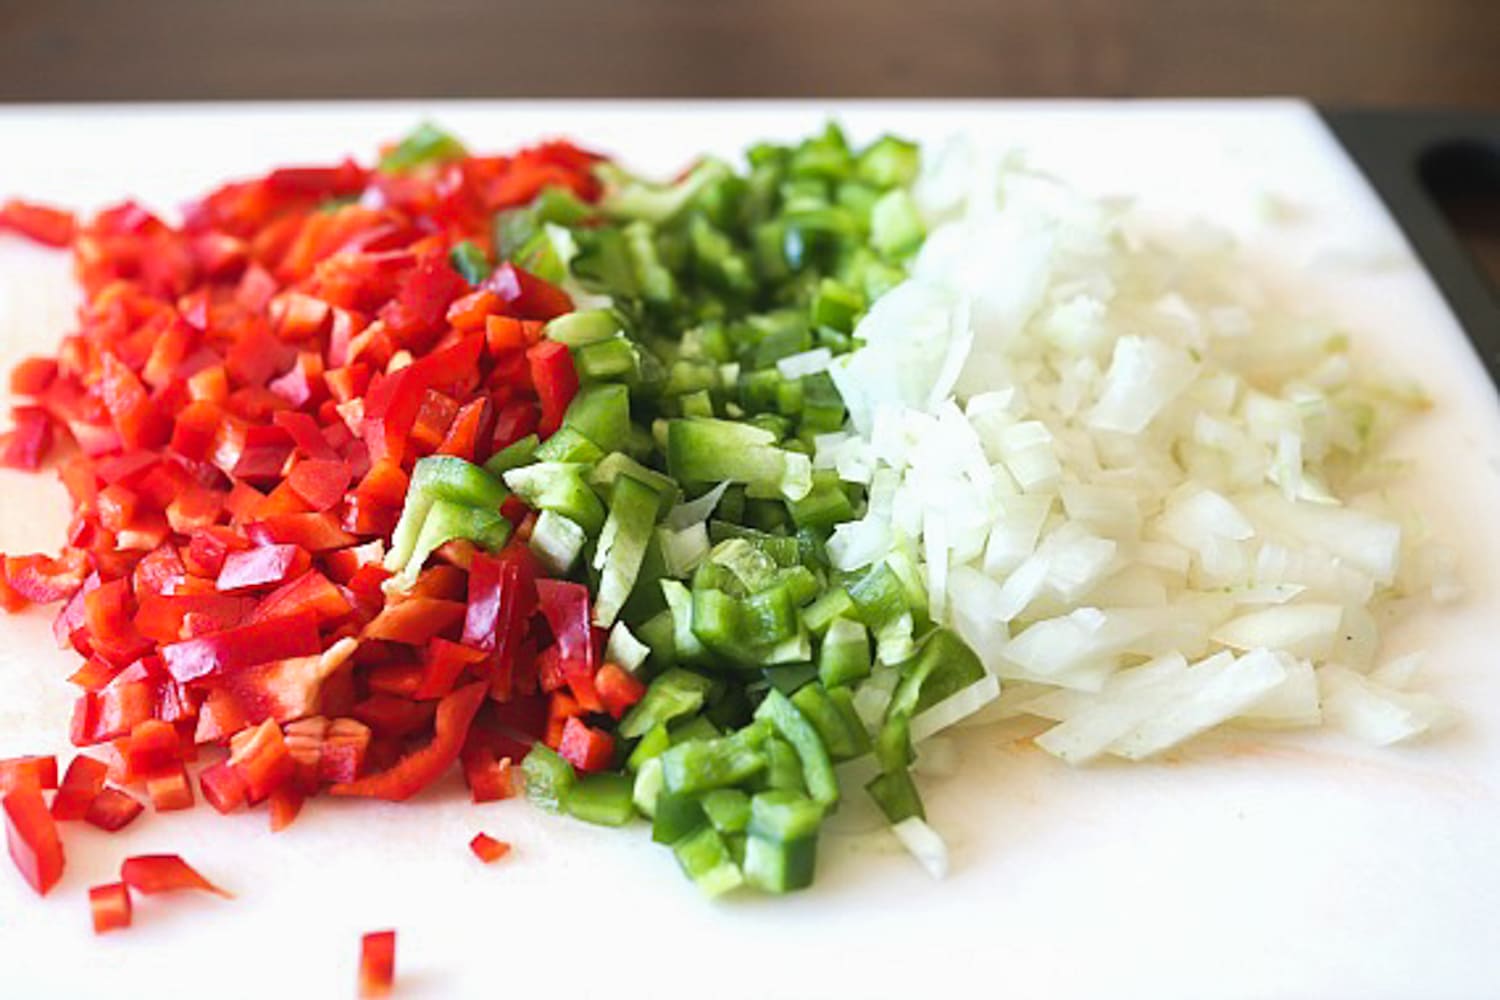 red bell peppers, green bell peppers, and onion diced on a white cutting board